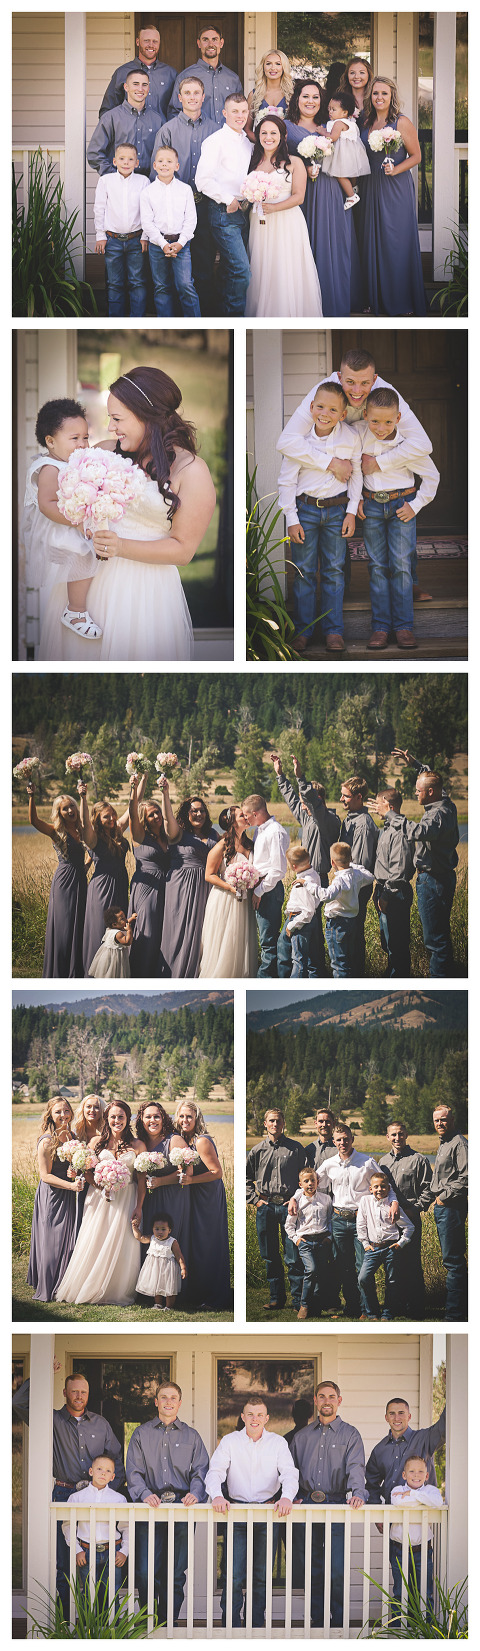 western wedding at the cattle barn in Cle Elum Wa photography by Hailey Haberman 